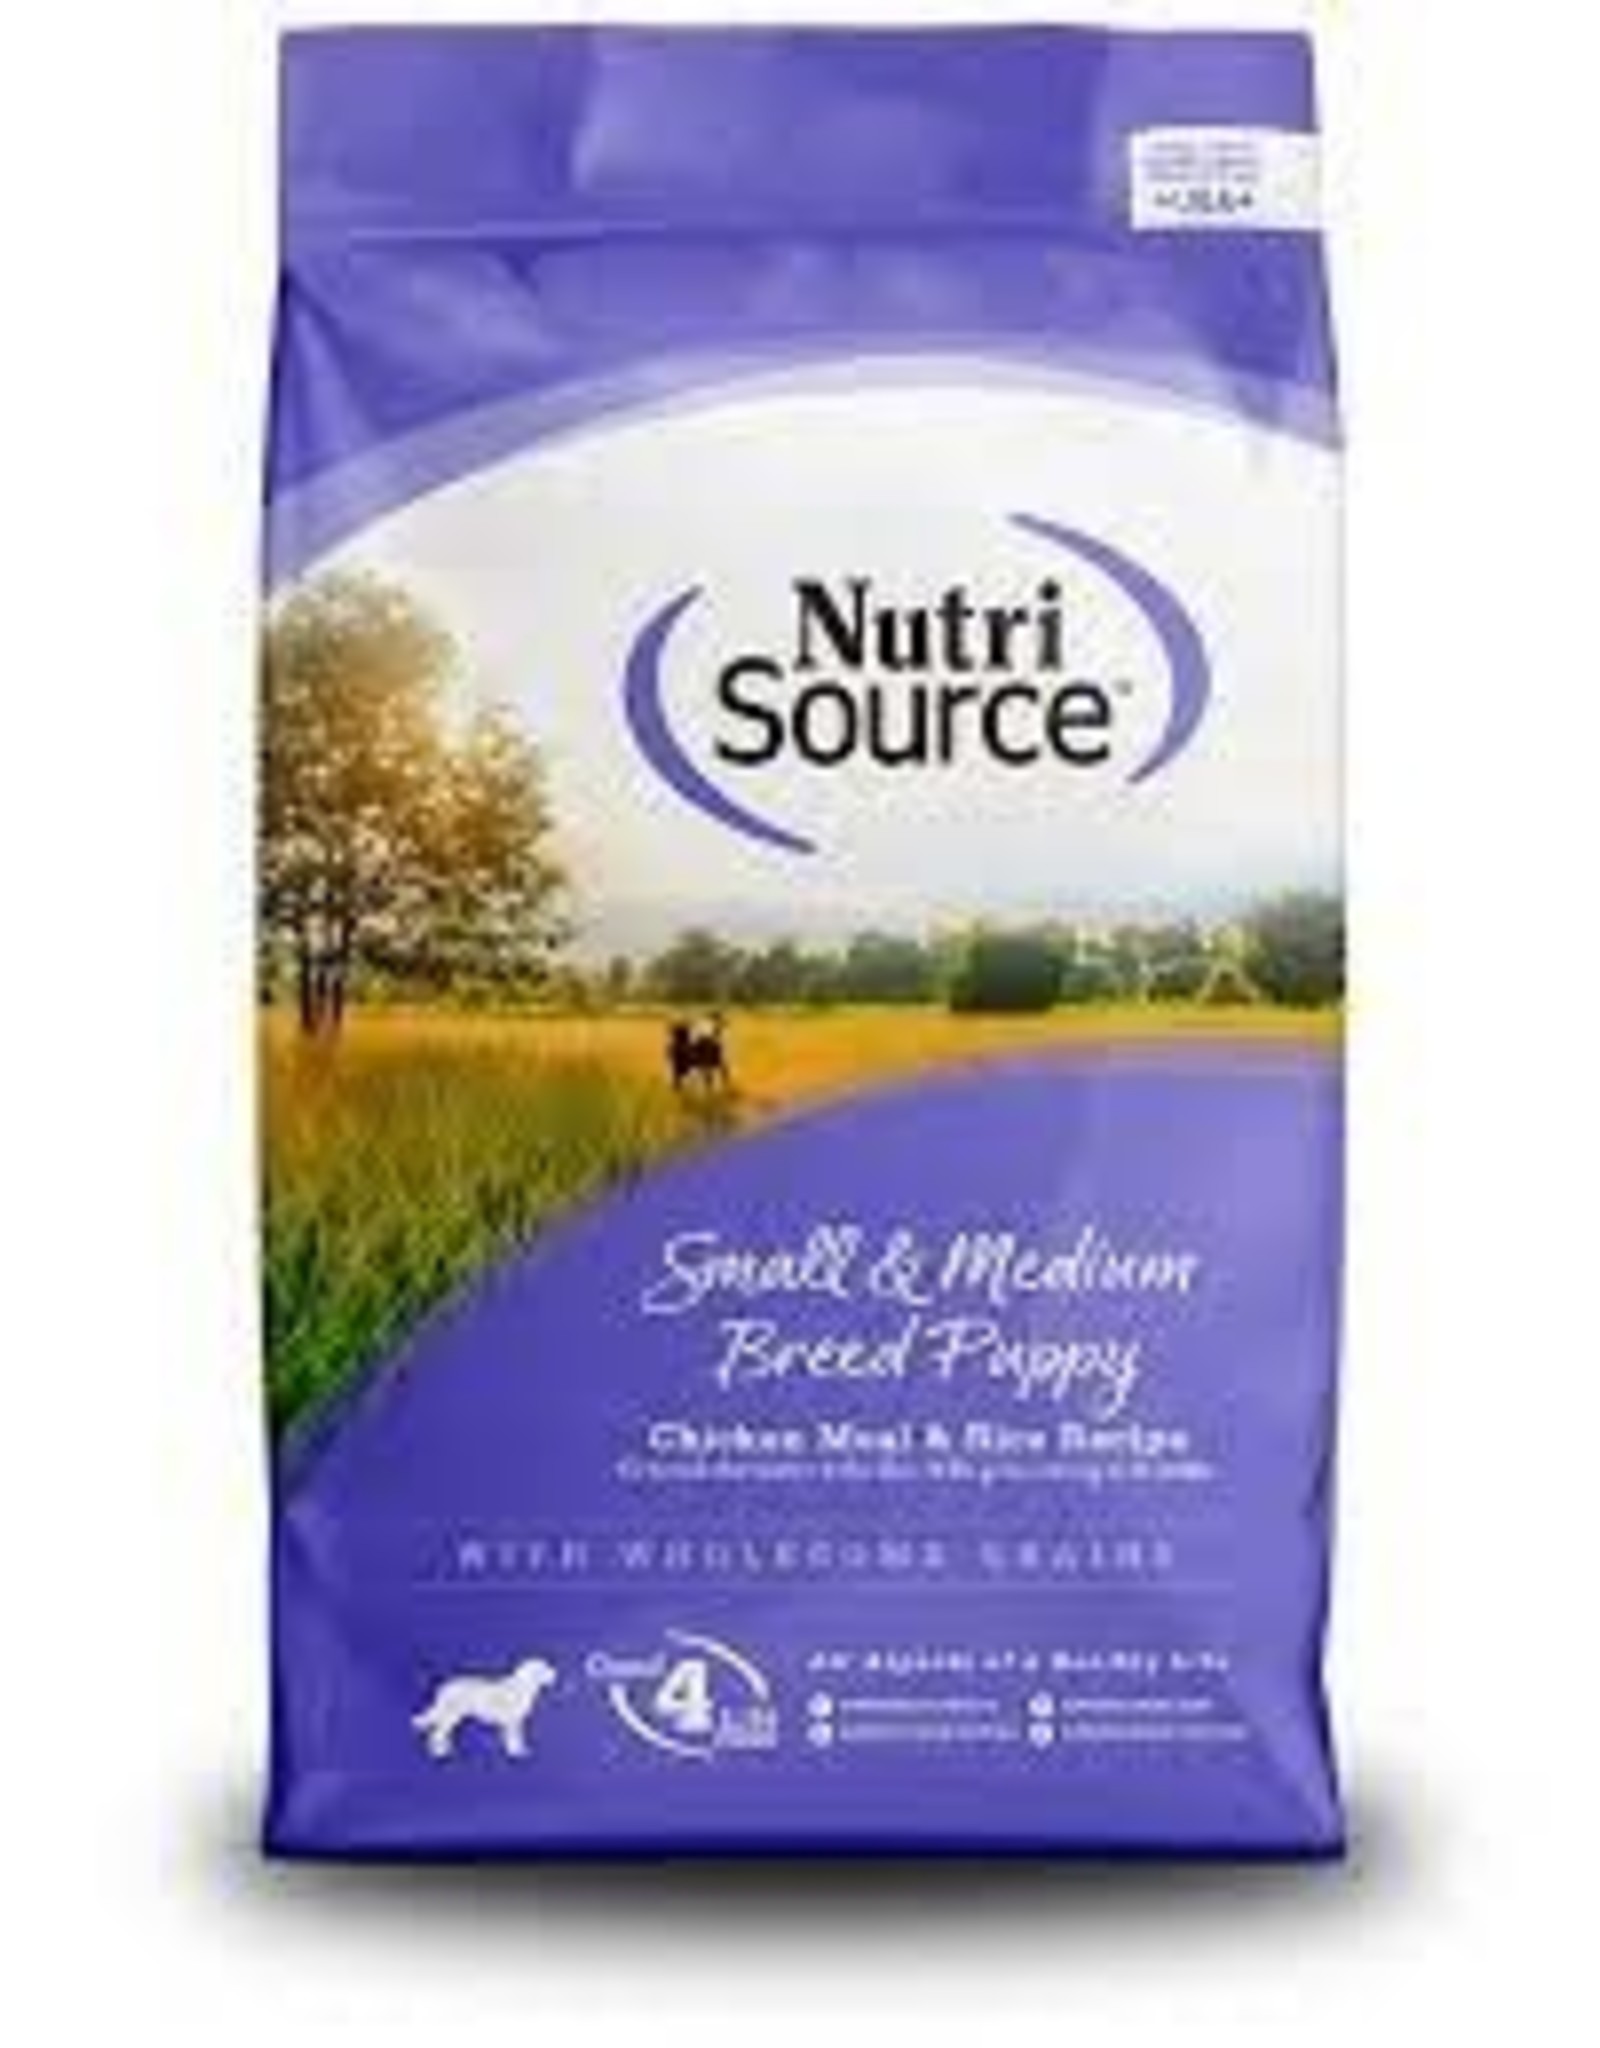 Nutri Source NUTRI SOURCE - Small and Medium Breed PUPPY- Dog Food Chicken and Rice 15lb - 26302-9 Purple